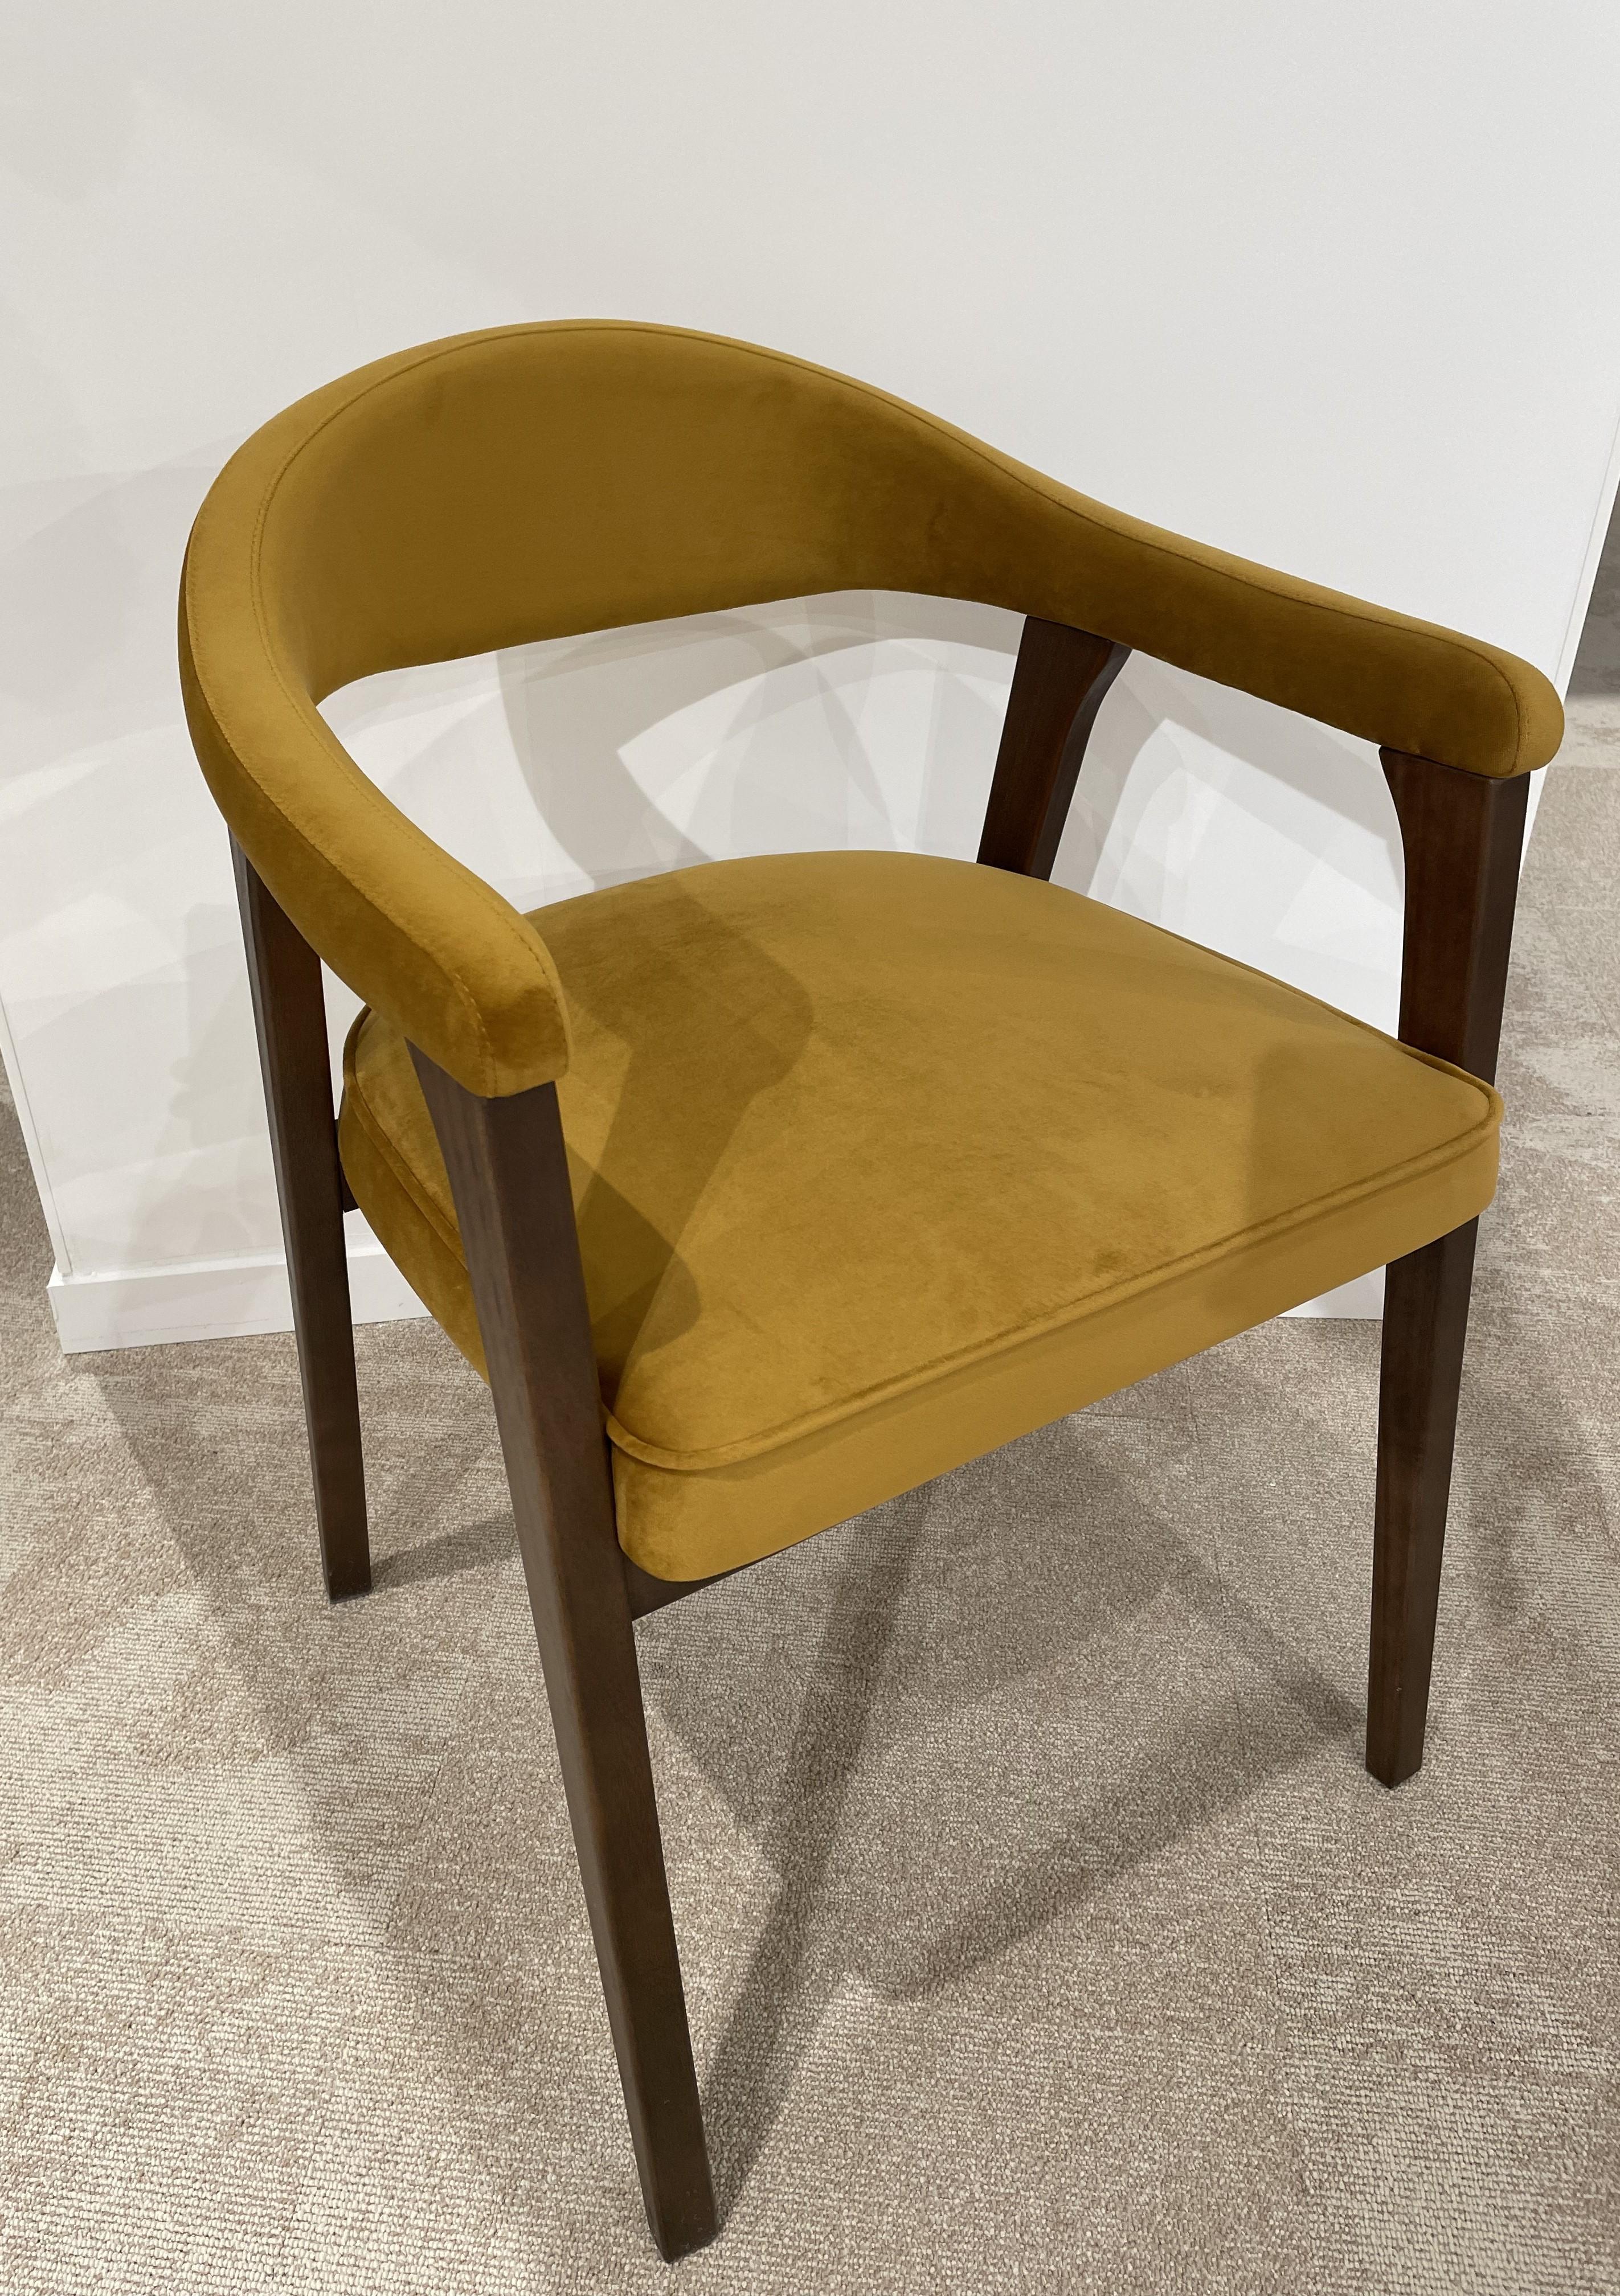 1960s Danish Design and Scandinavian Style Wooden and Velvet Fabric Chair For Sale 5